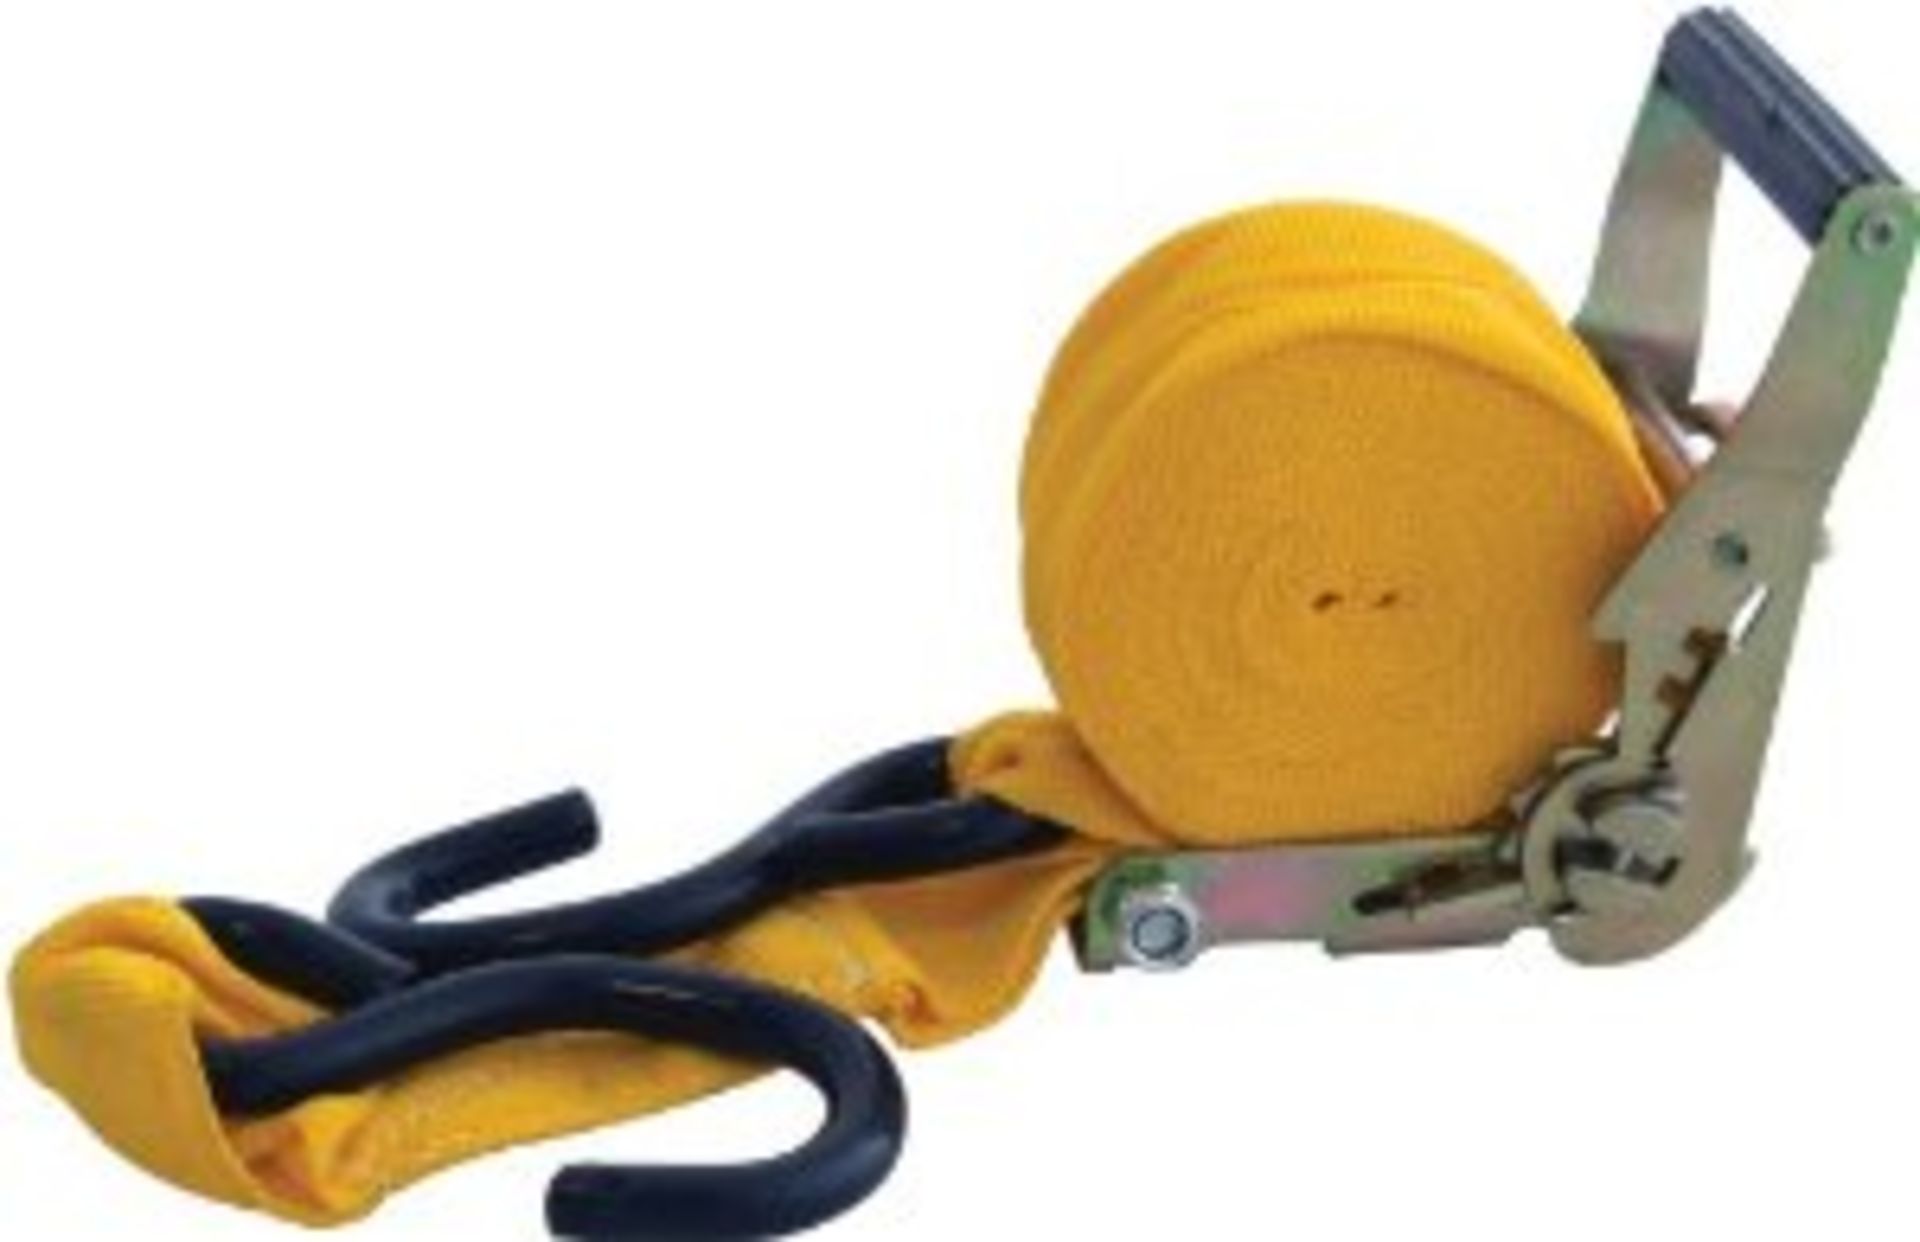 V *TRADE QTY* Brand New 50mm Large Ratchet Tie Down X 5 YOUR BID PRICE TO BE MULTIPLIED BY FIVE